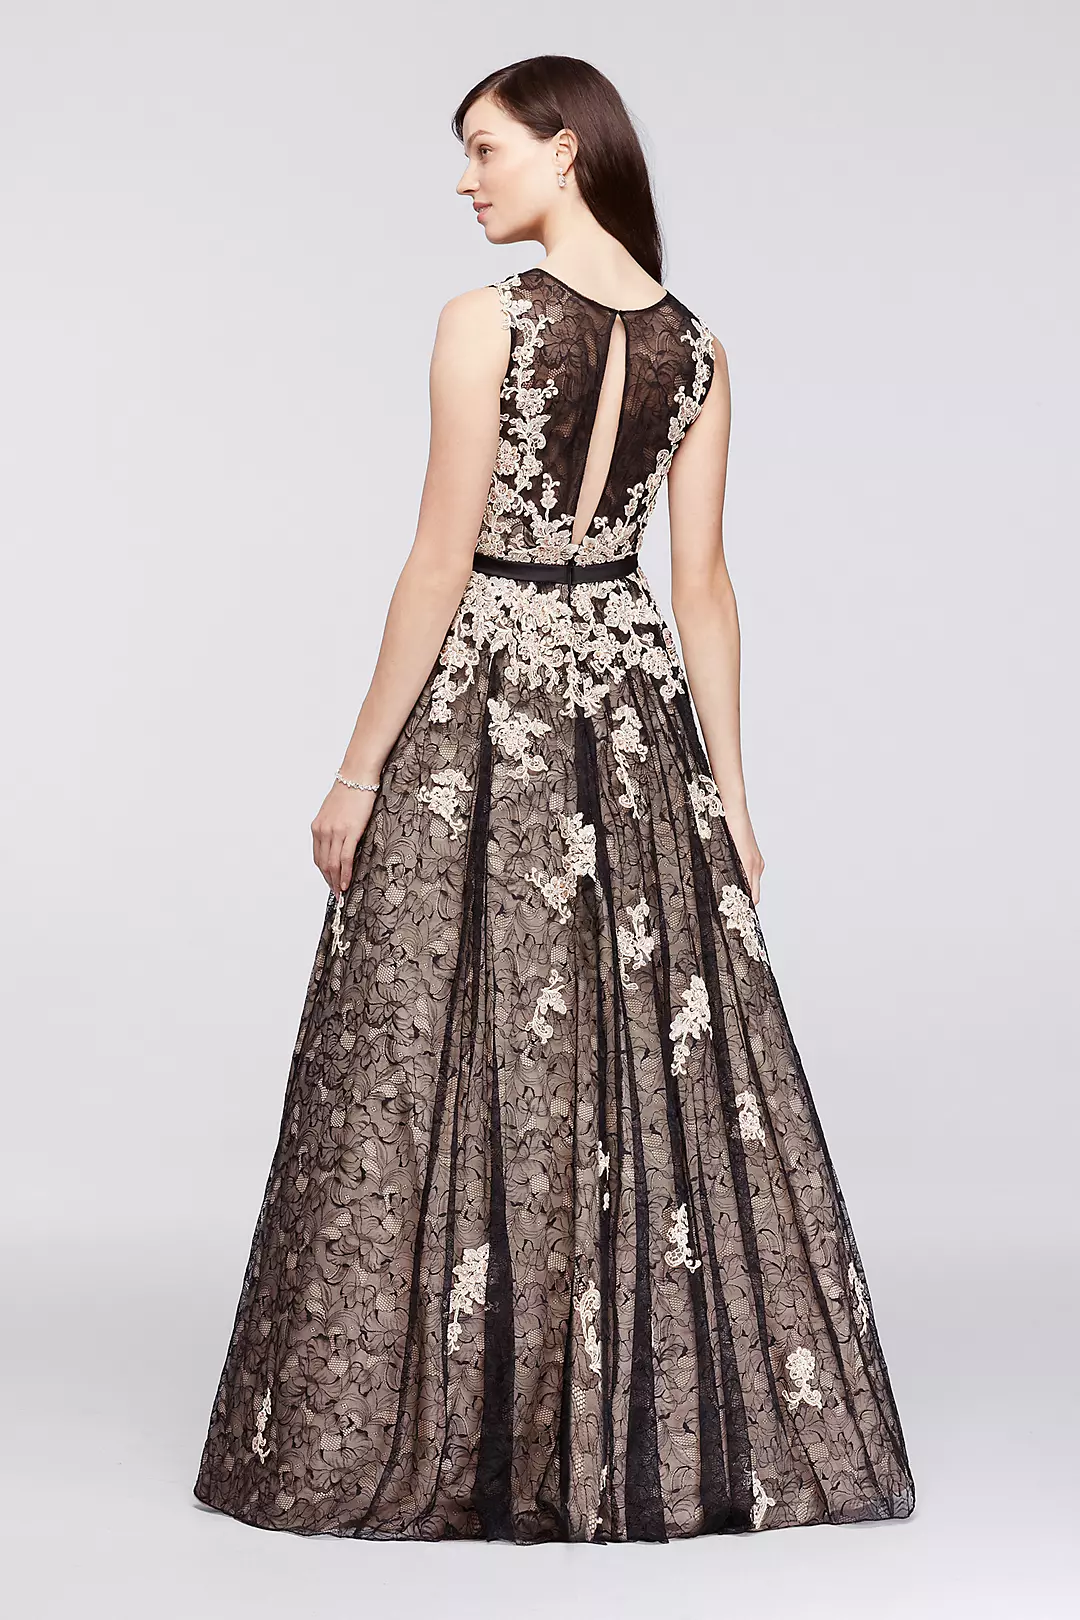 Sleeveless Lace Ball Gown with Illusion Neckline Image 2